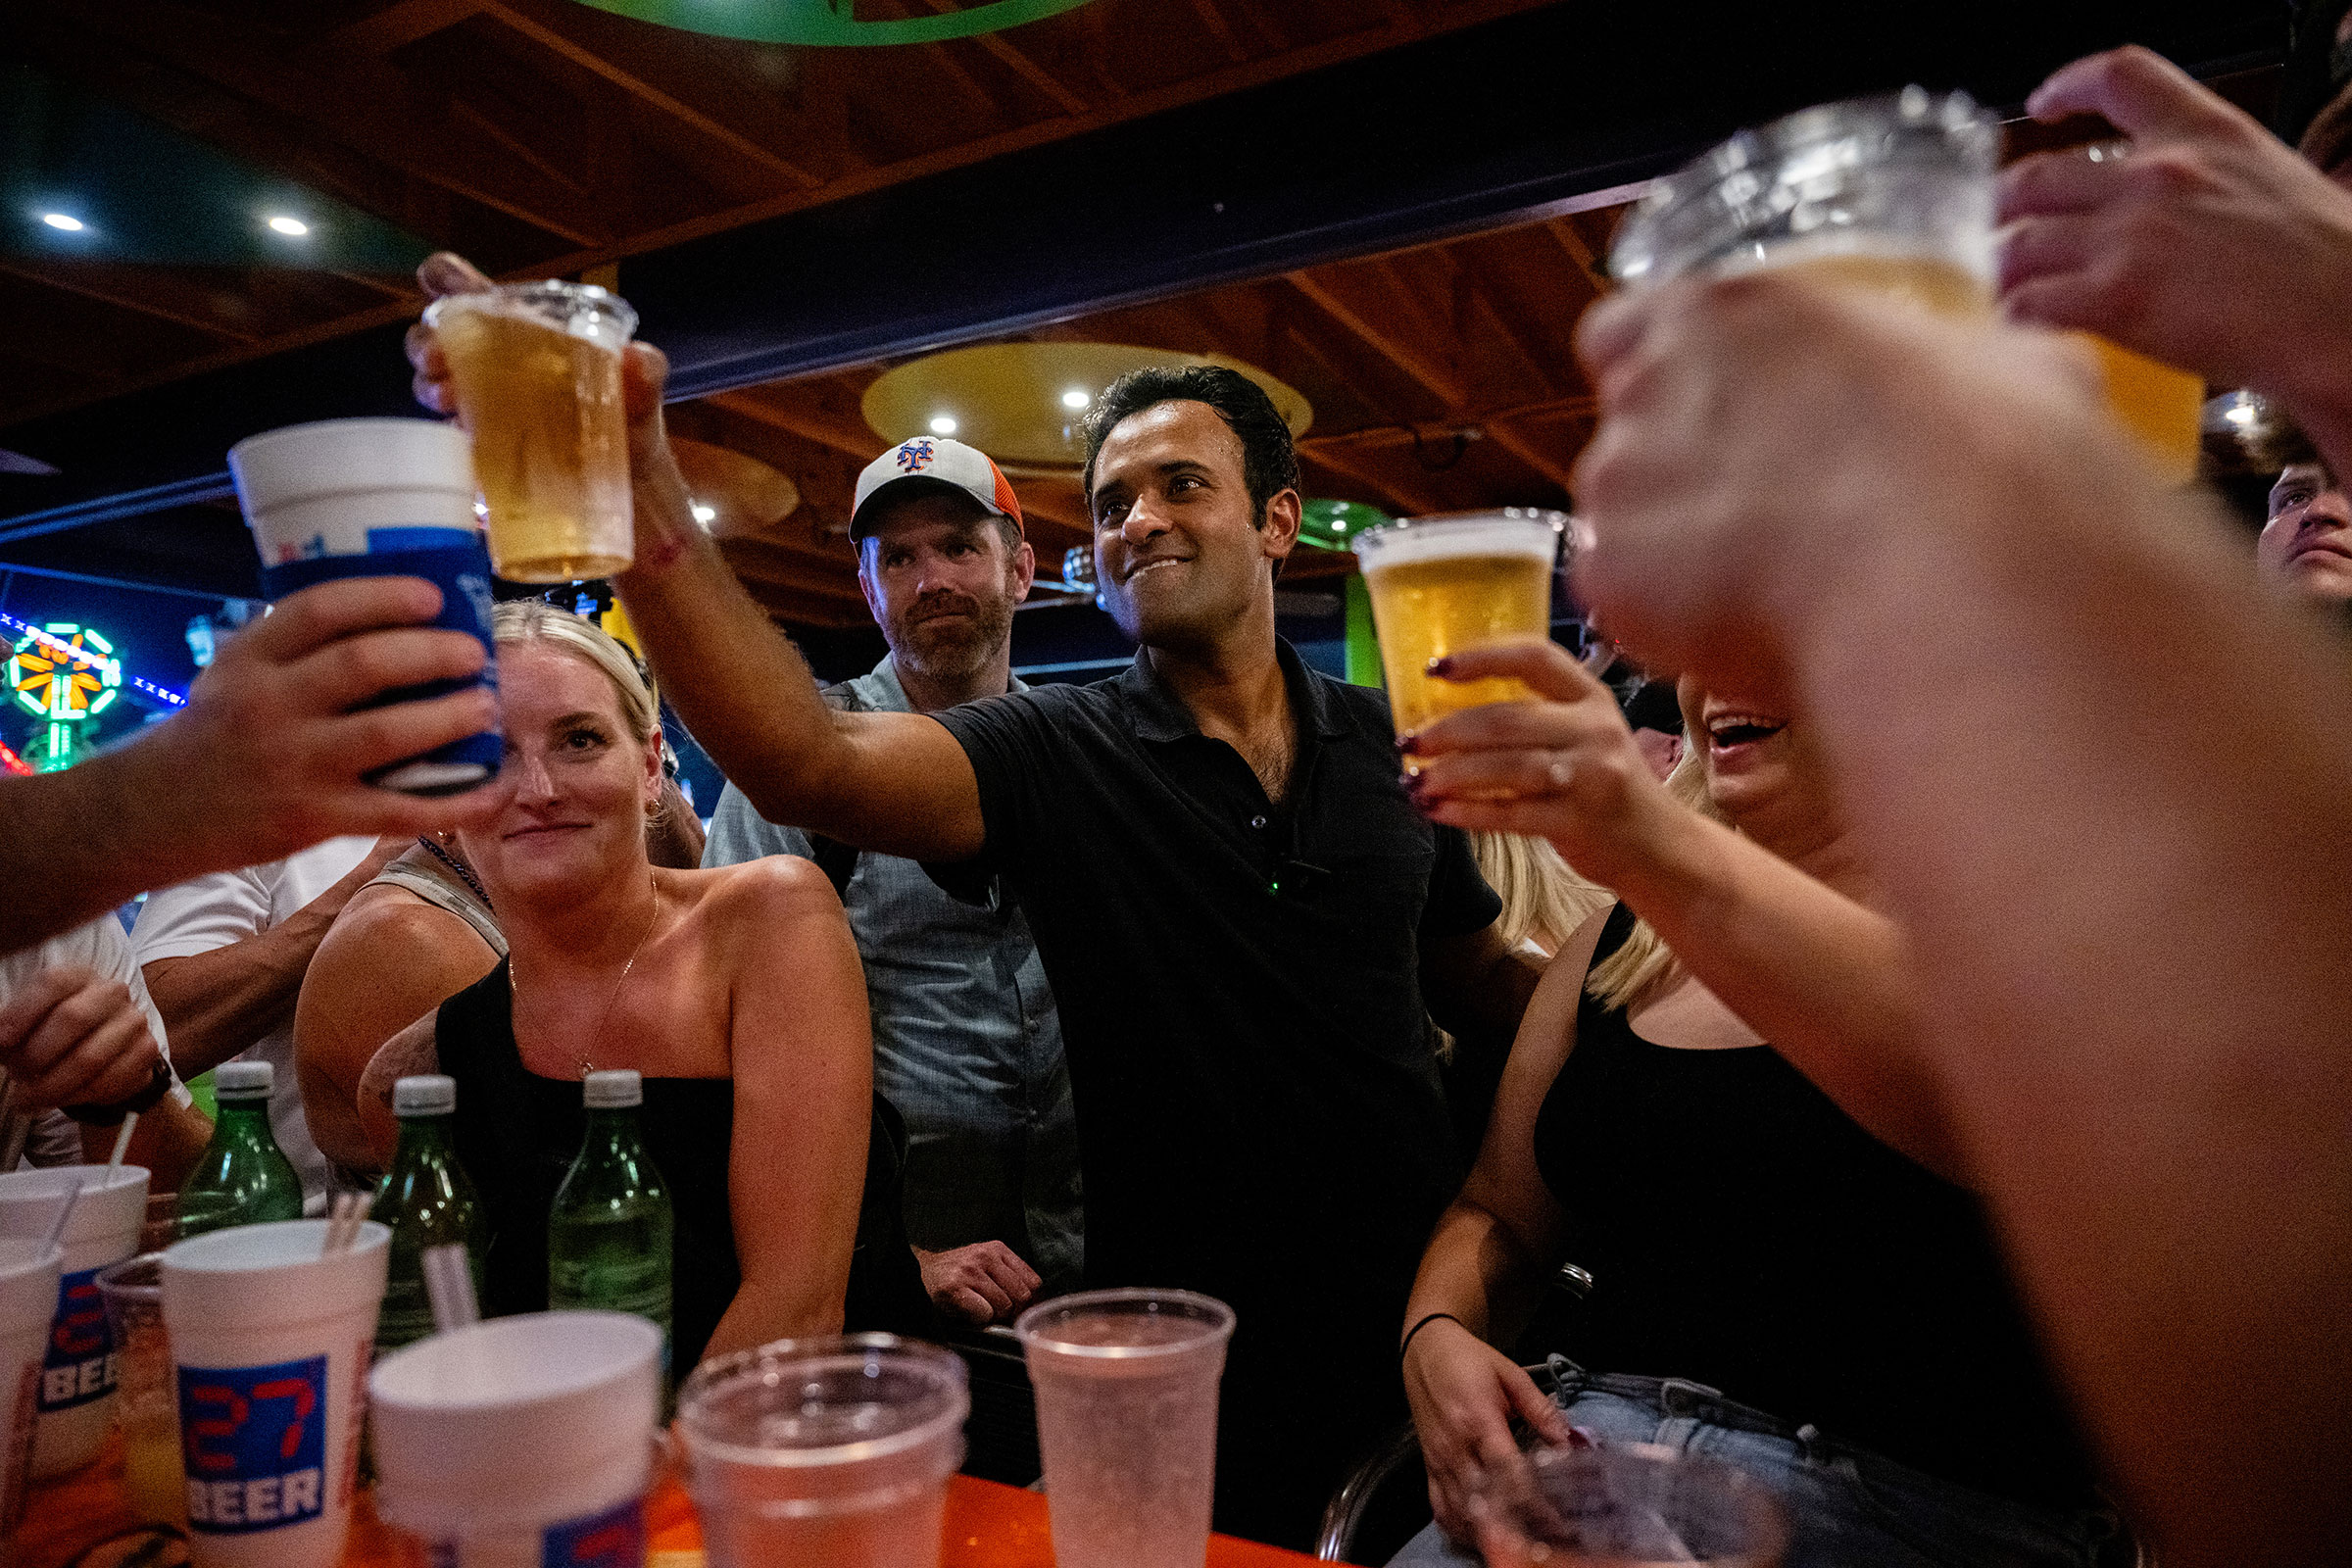 Vivek Ramaswamy holds a beer in the air as he toasts with supporters in a bar